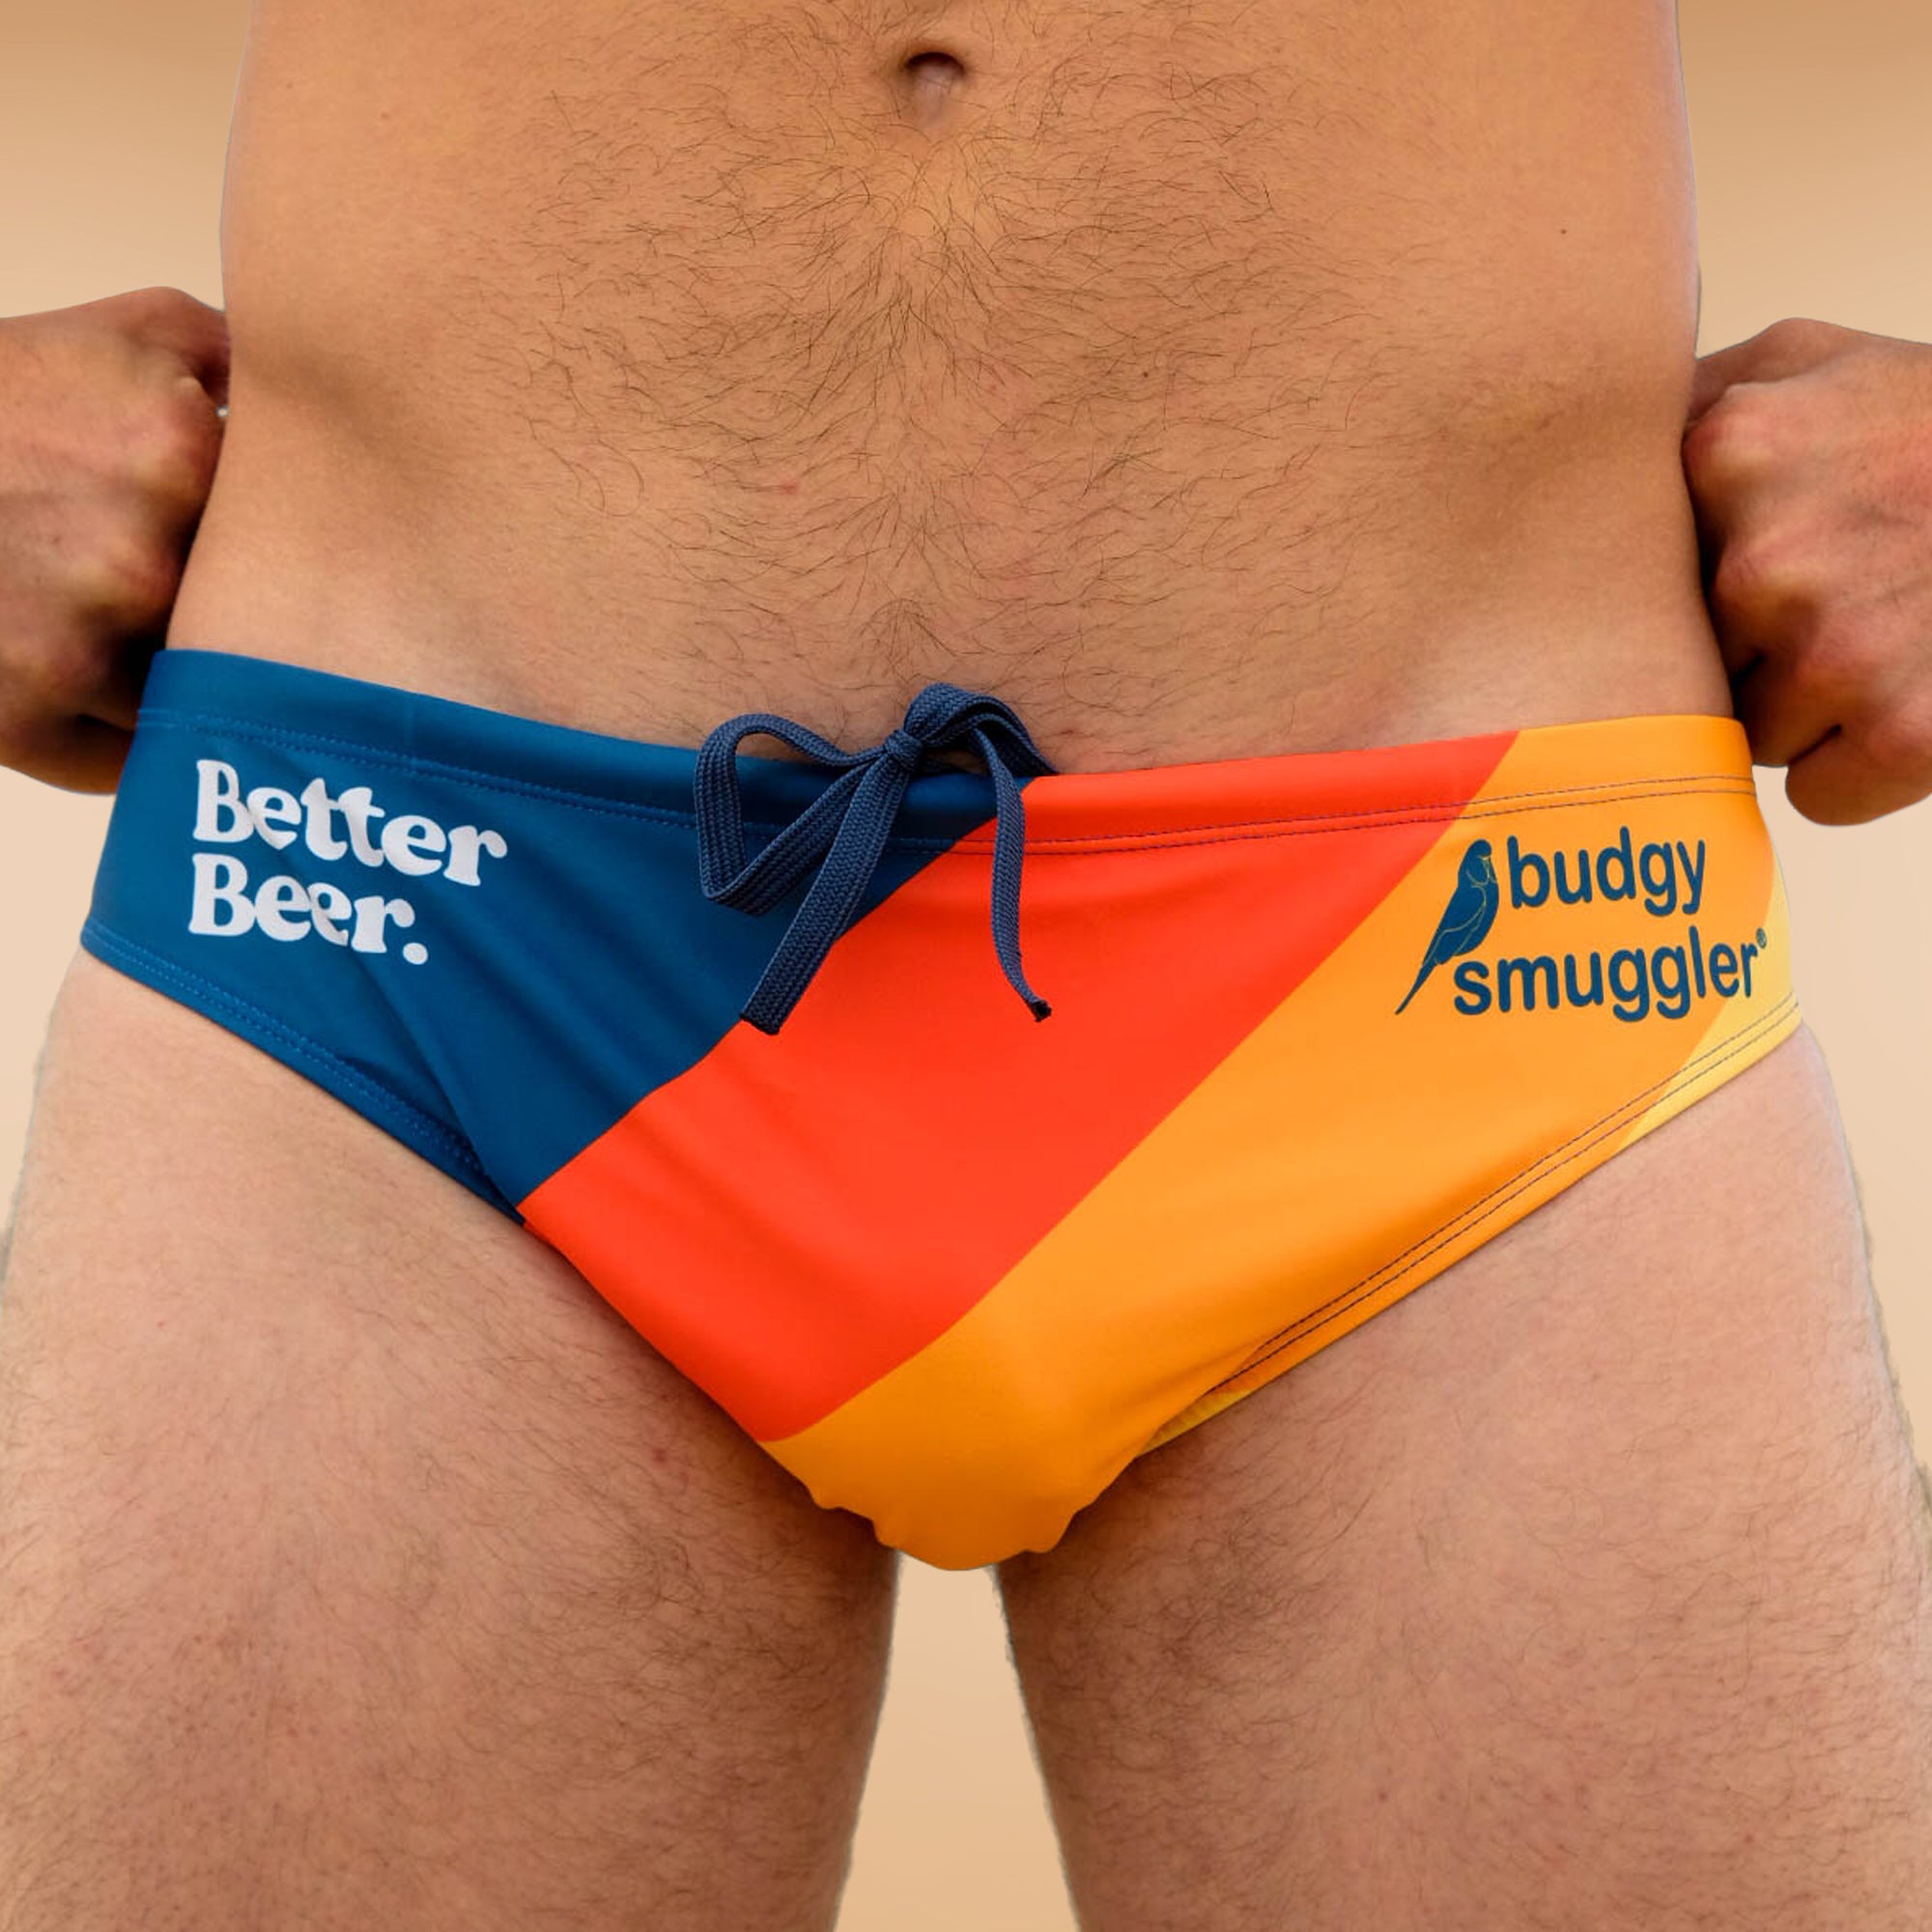 Better Beer Budgy Smugglers in front view - Better Beer